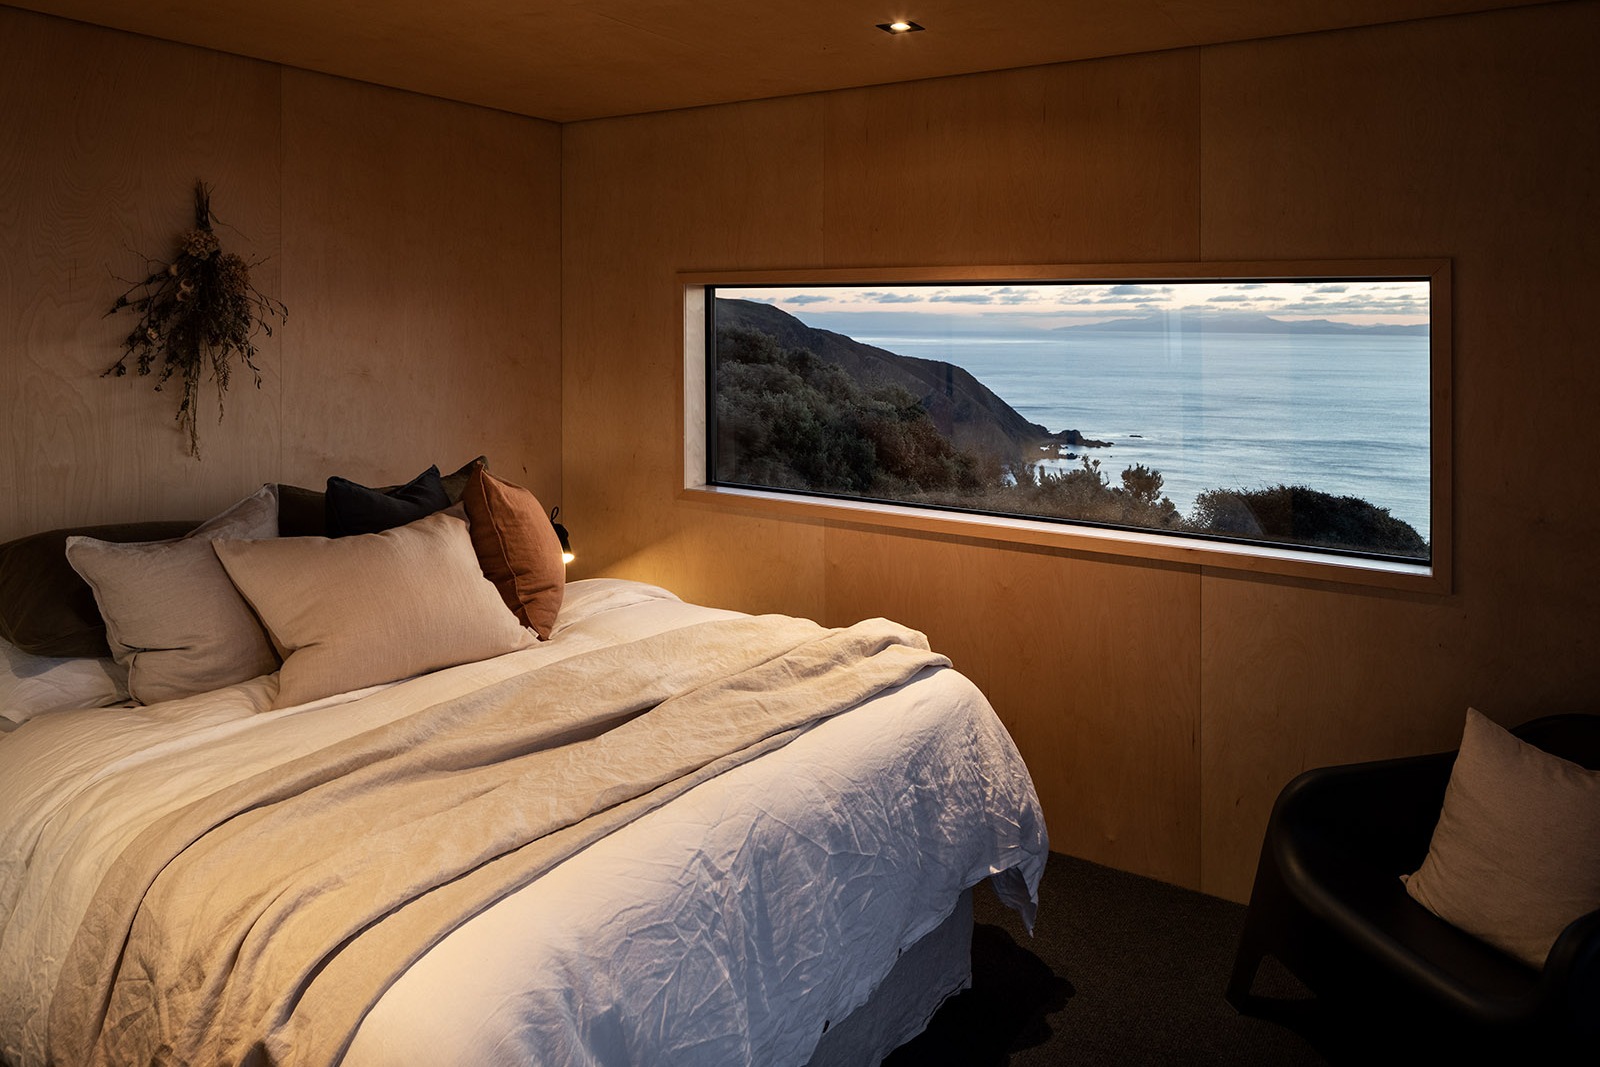 Pipinui Point accomidation master bedroom, with veiws down to the ocean from the window